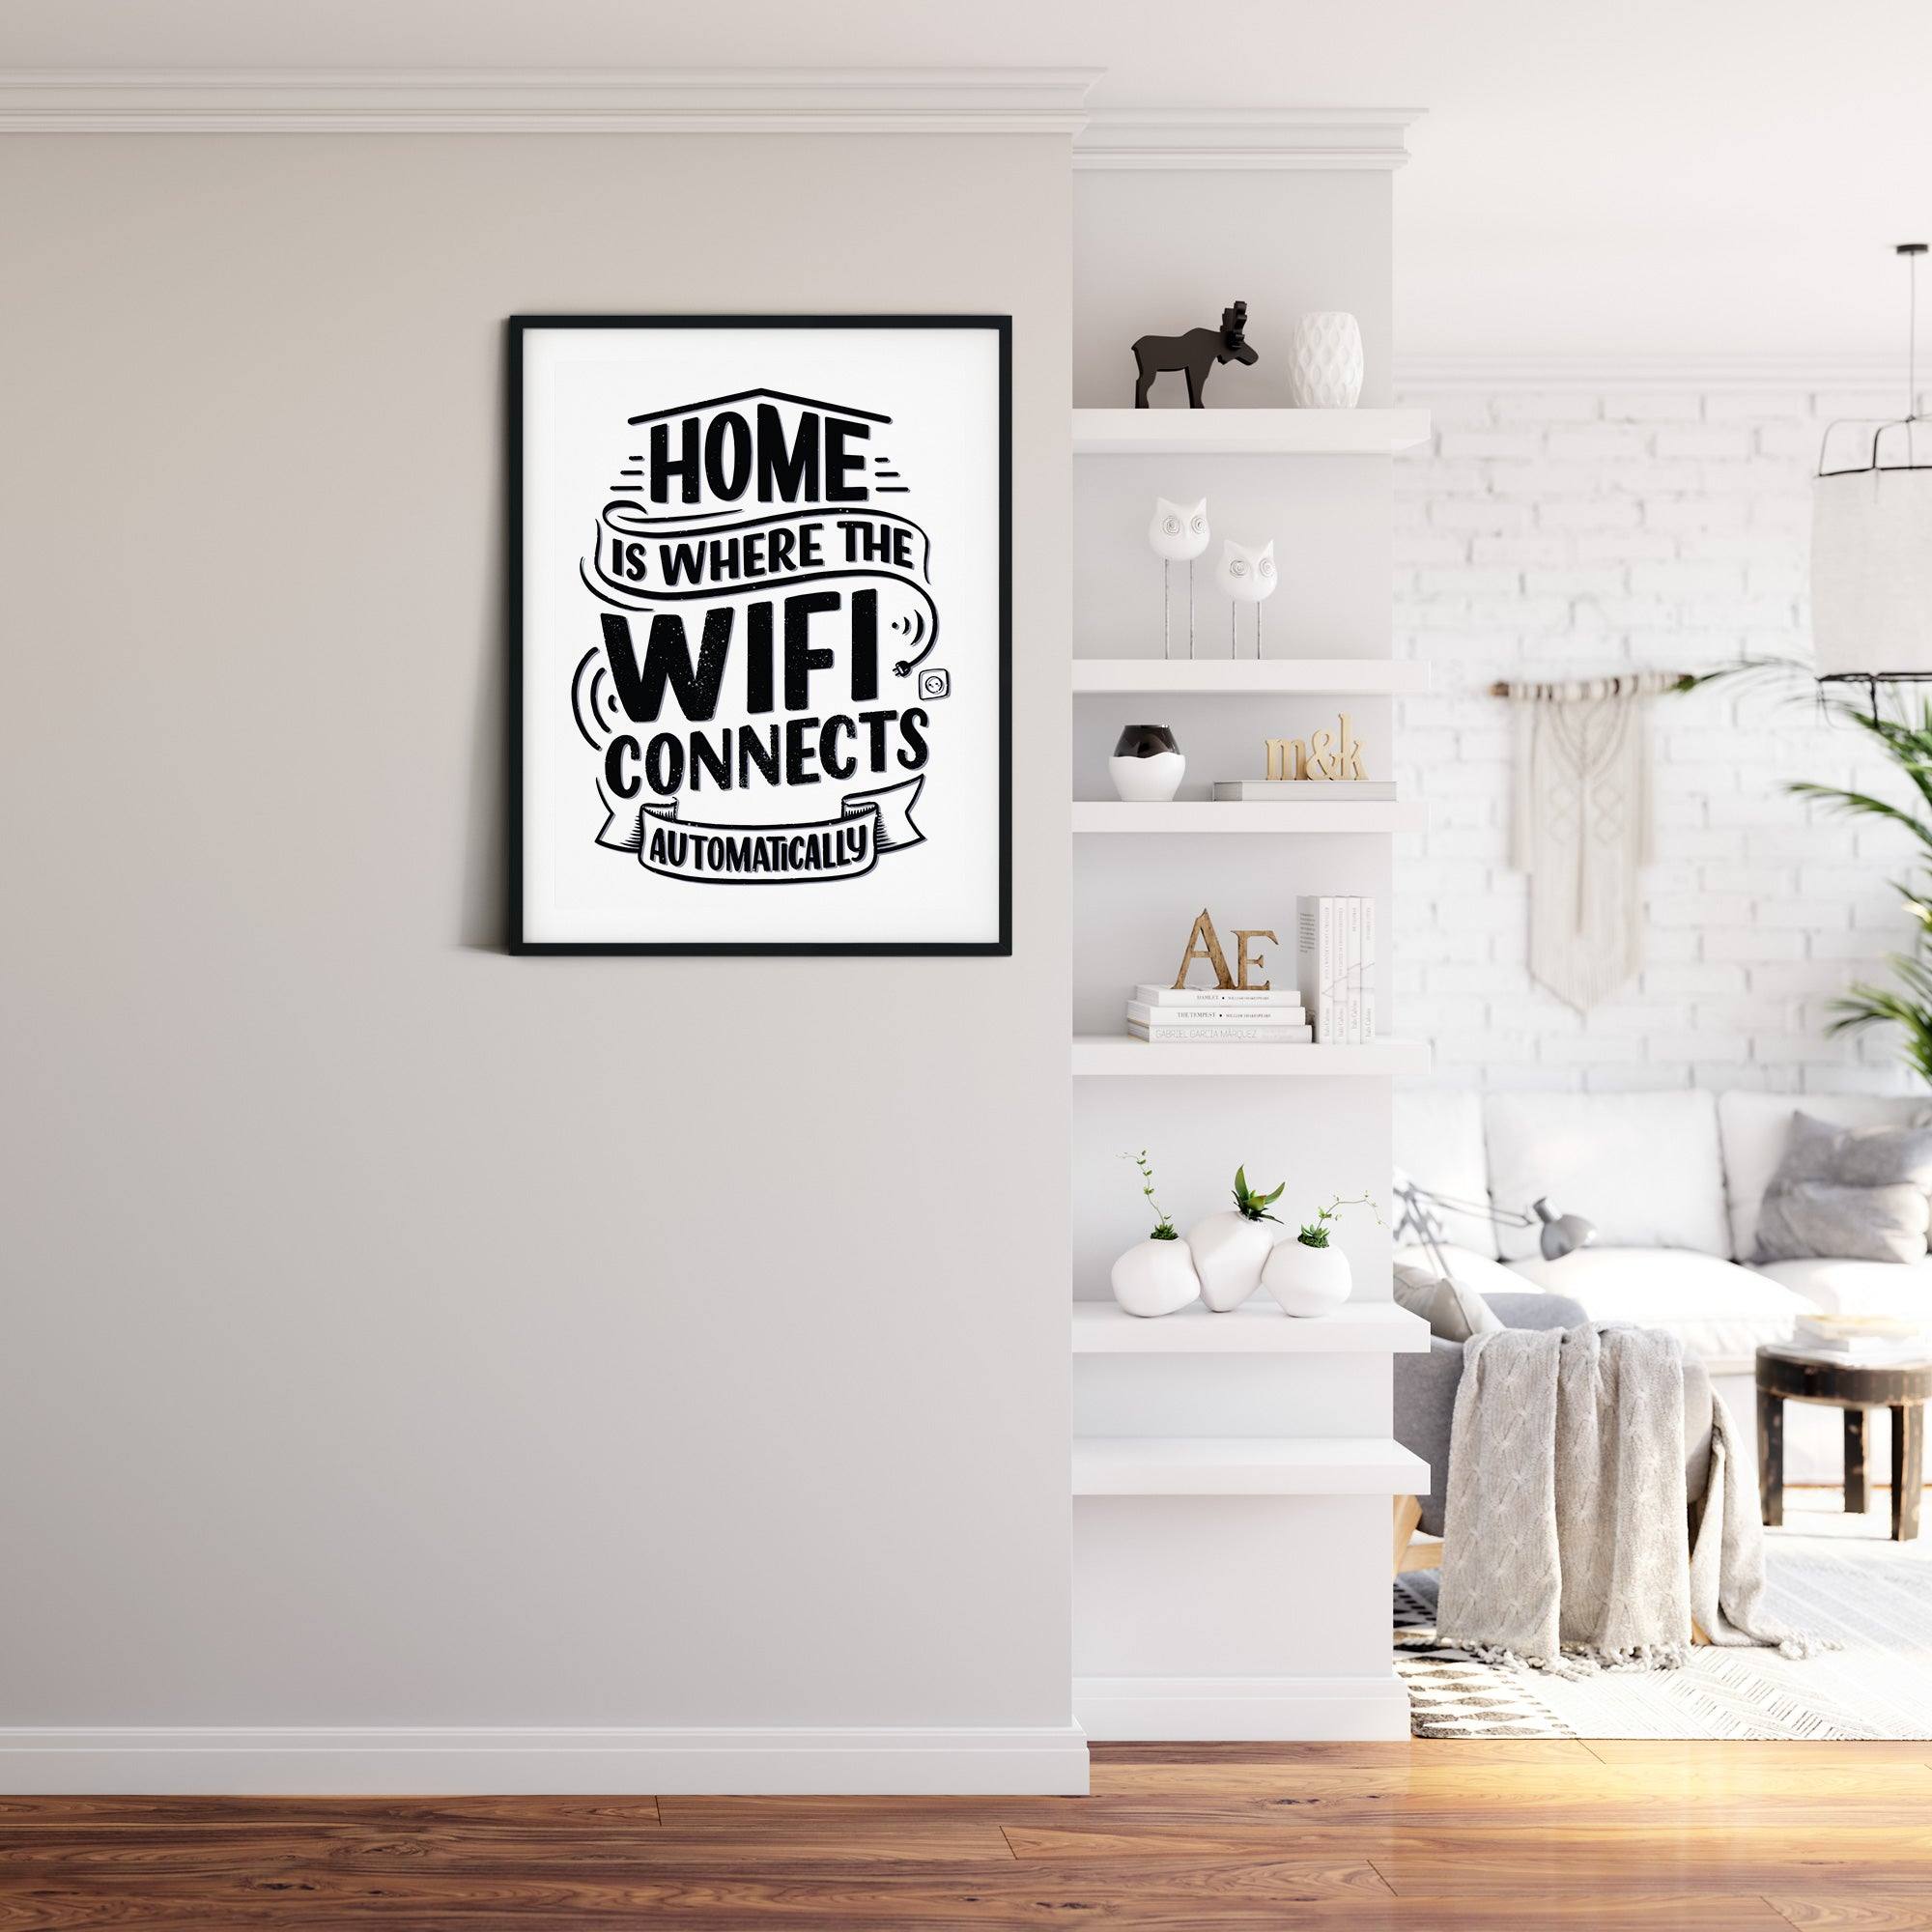 Home Is Where The Wifi Connects Automatically Wall Print - Printibly